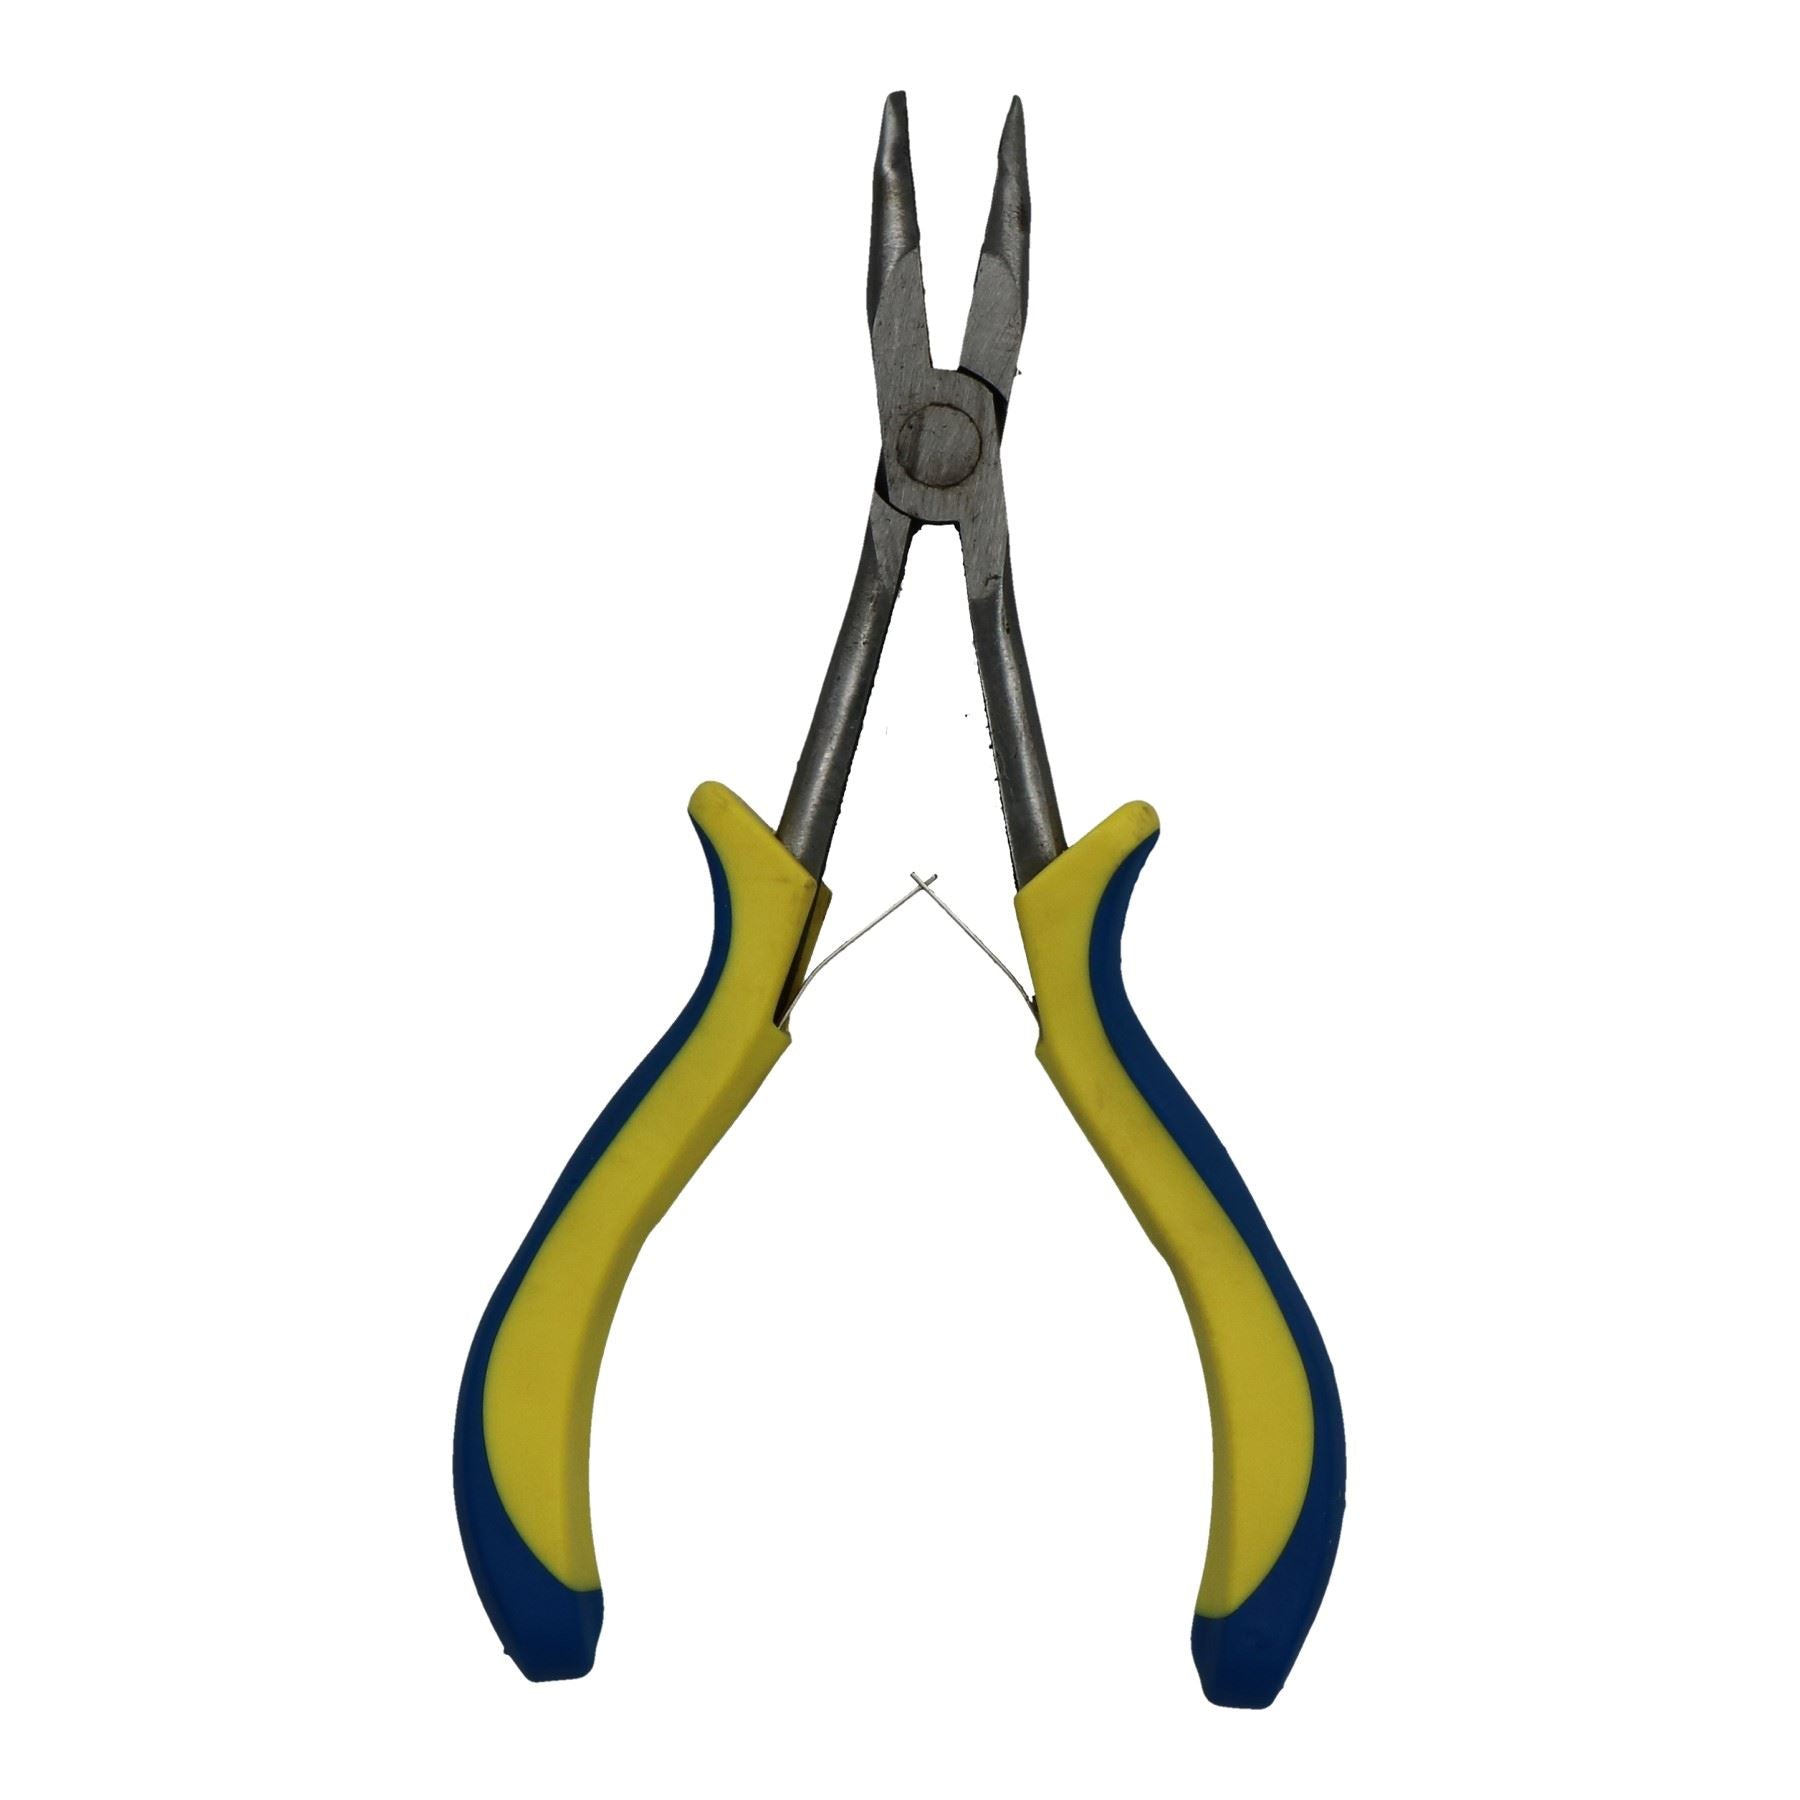 165mm Extra Long Series Precision Bent Nose Pliers Plier Modelling Hobby Craft